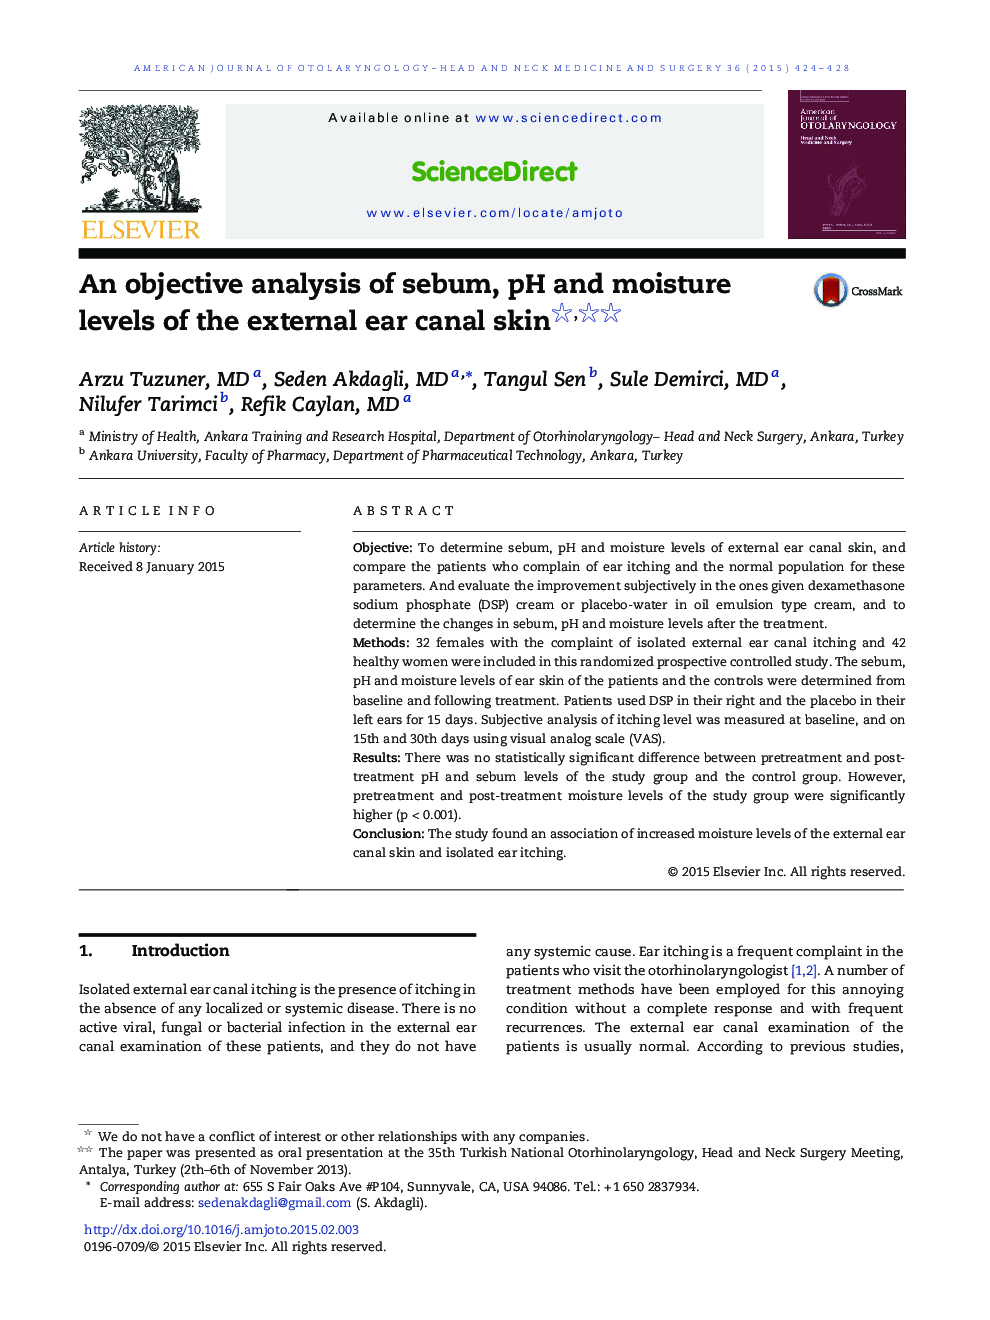 An objective analysis of sebum, pH and moisture levels of the external ear canal skin 